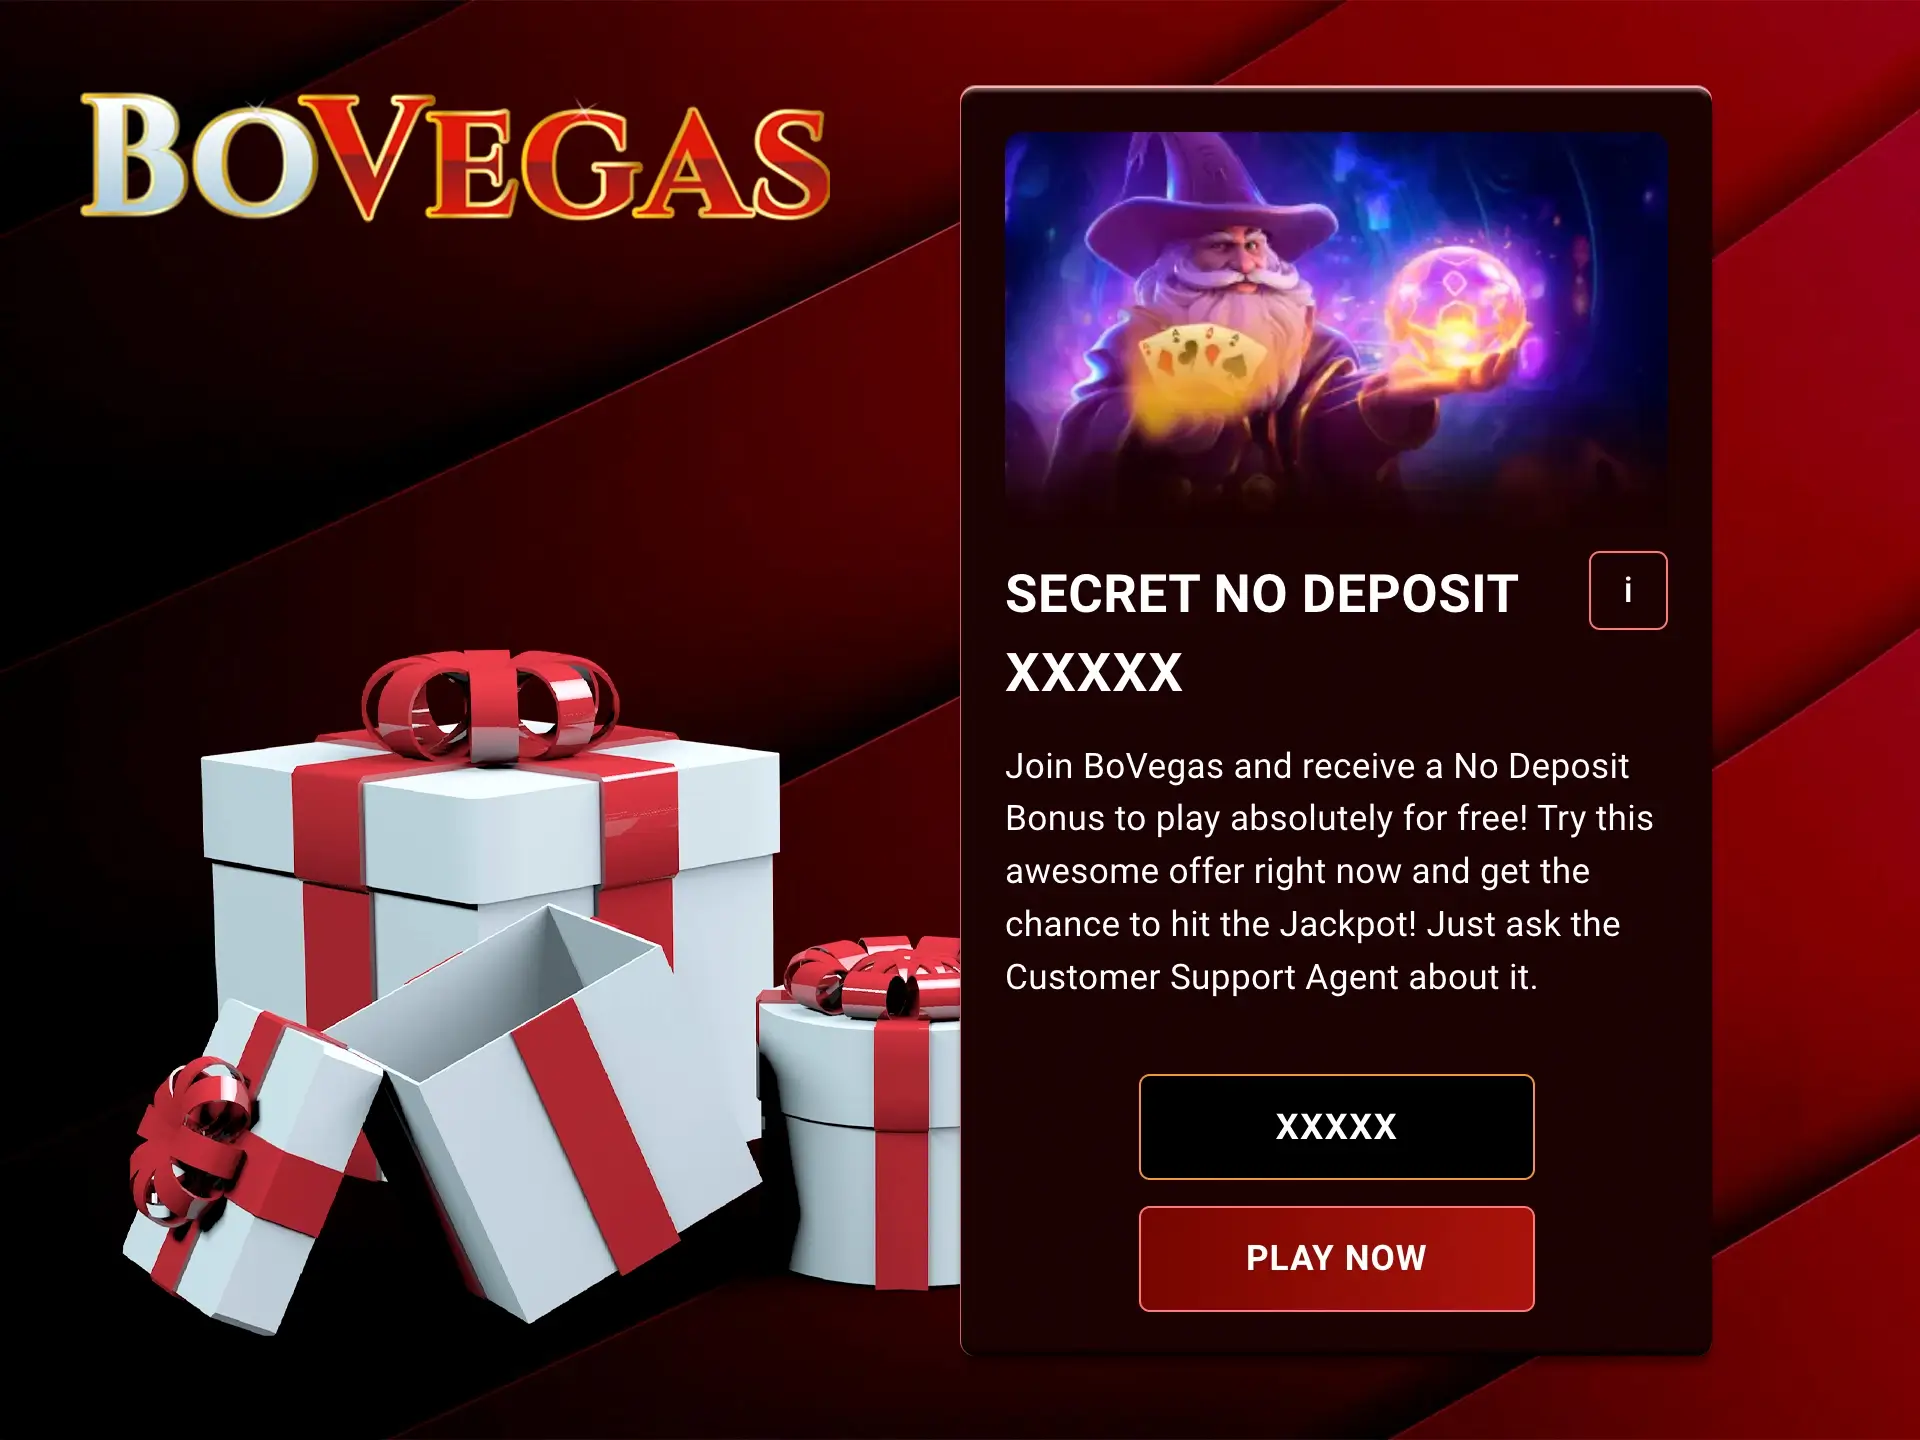 Hurry up and use the no deposit promo code to test your chances of winning at BoVegas Casino.